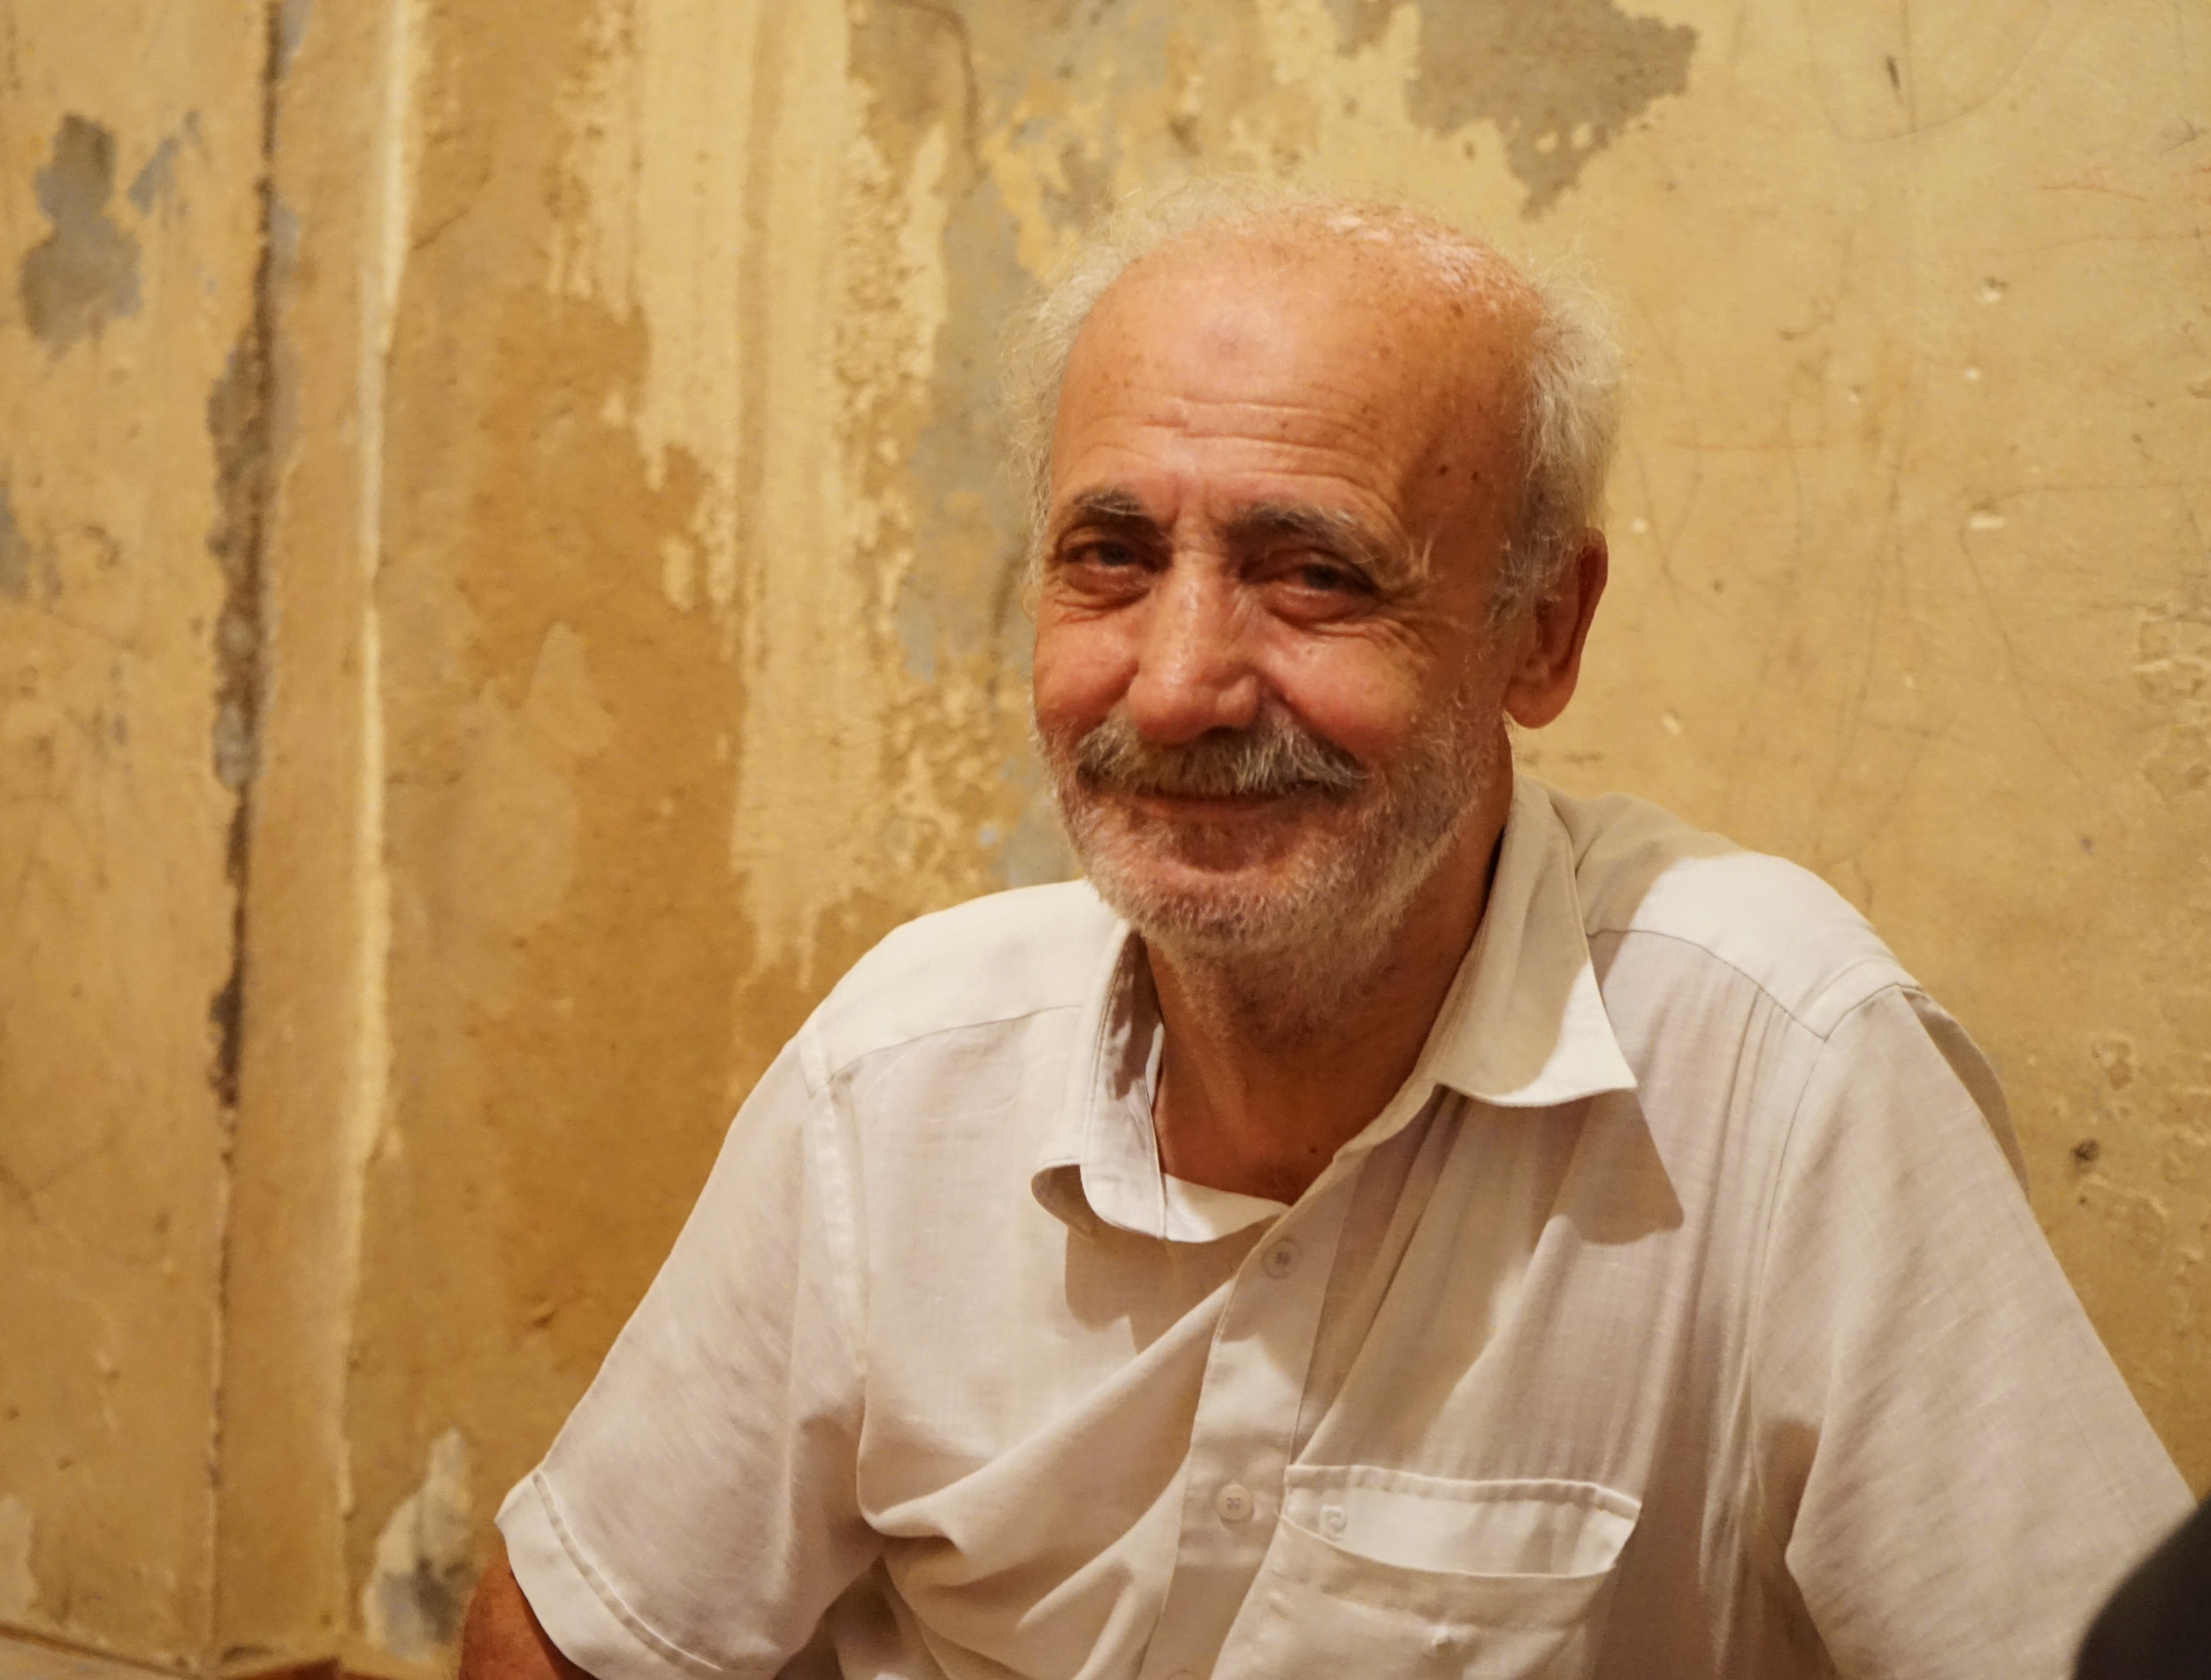  Ghanam smiles for the camera in his home in Sabra and Shatila on August 17, 2016. 